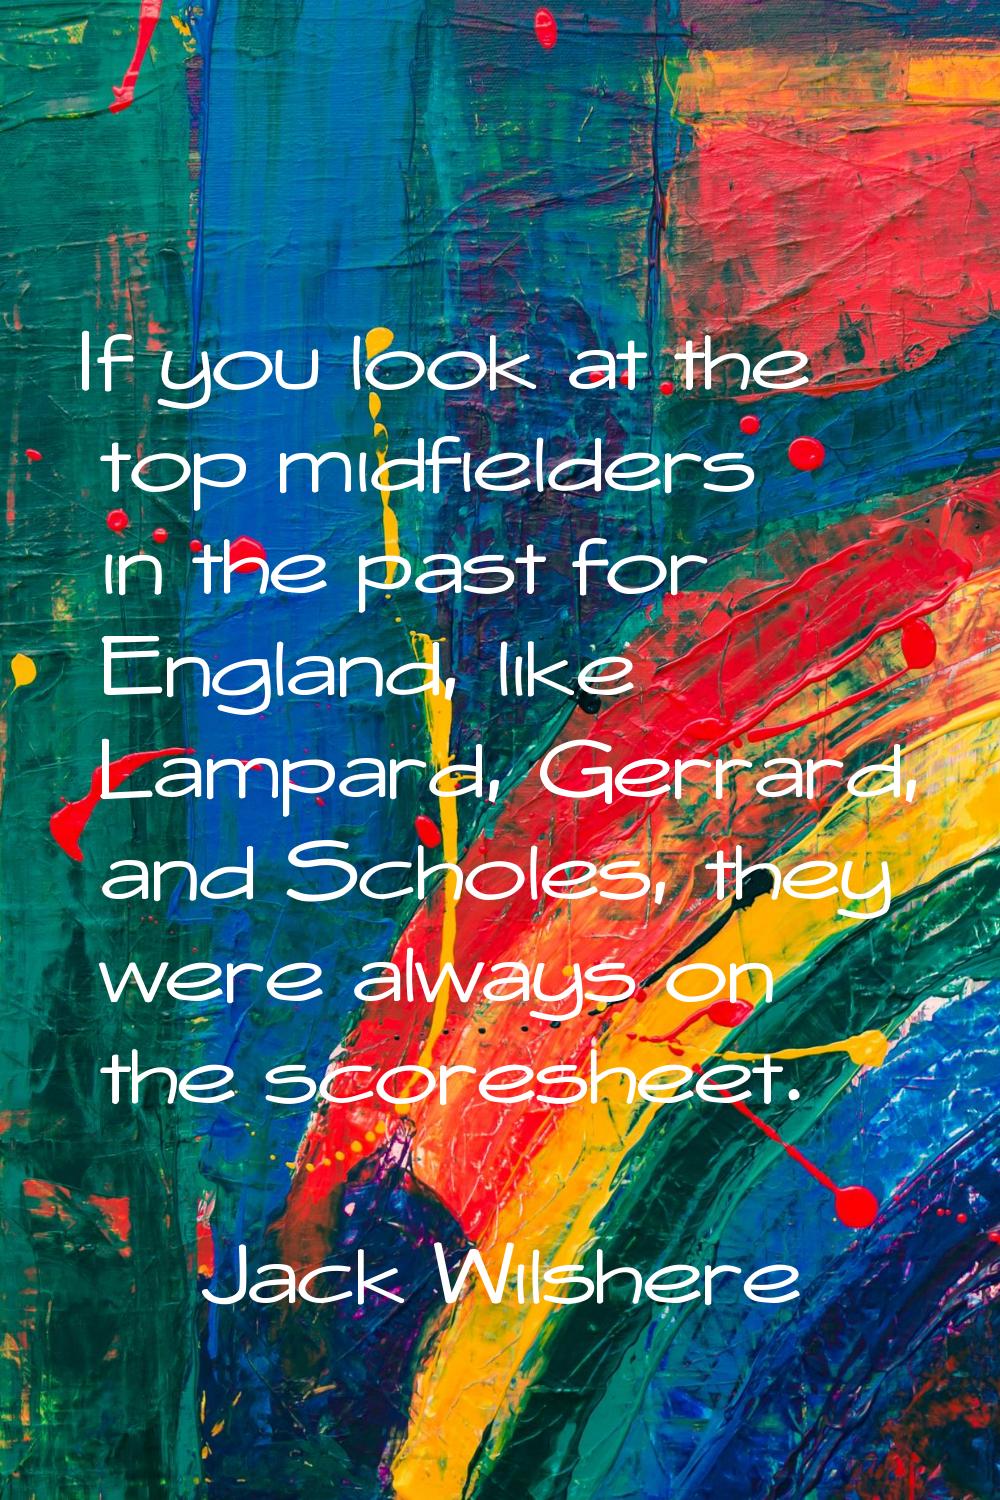 If you look at the top midfielders in the past for England, like Lampard, Gerrard, and Scholes, the